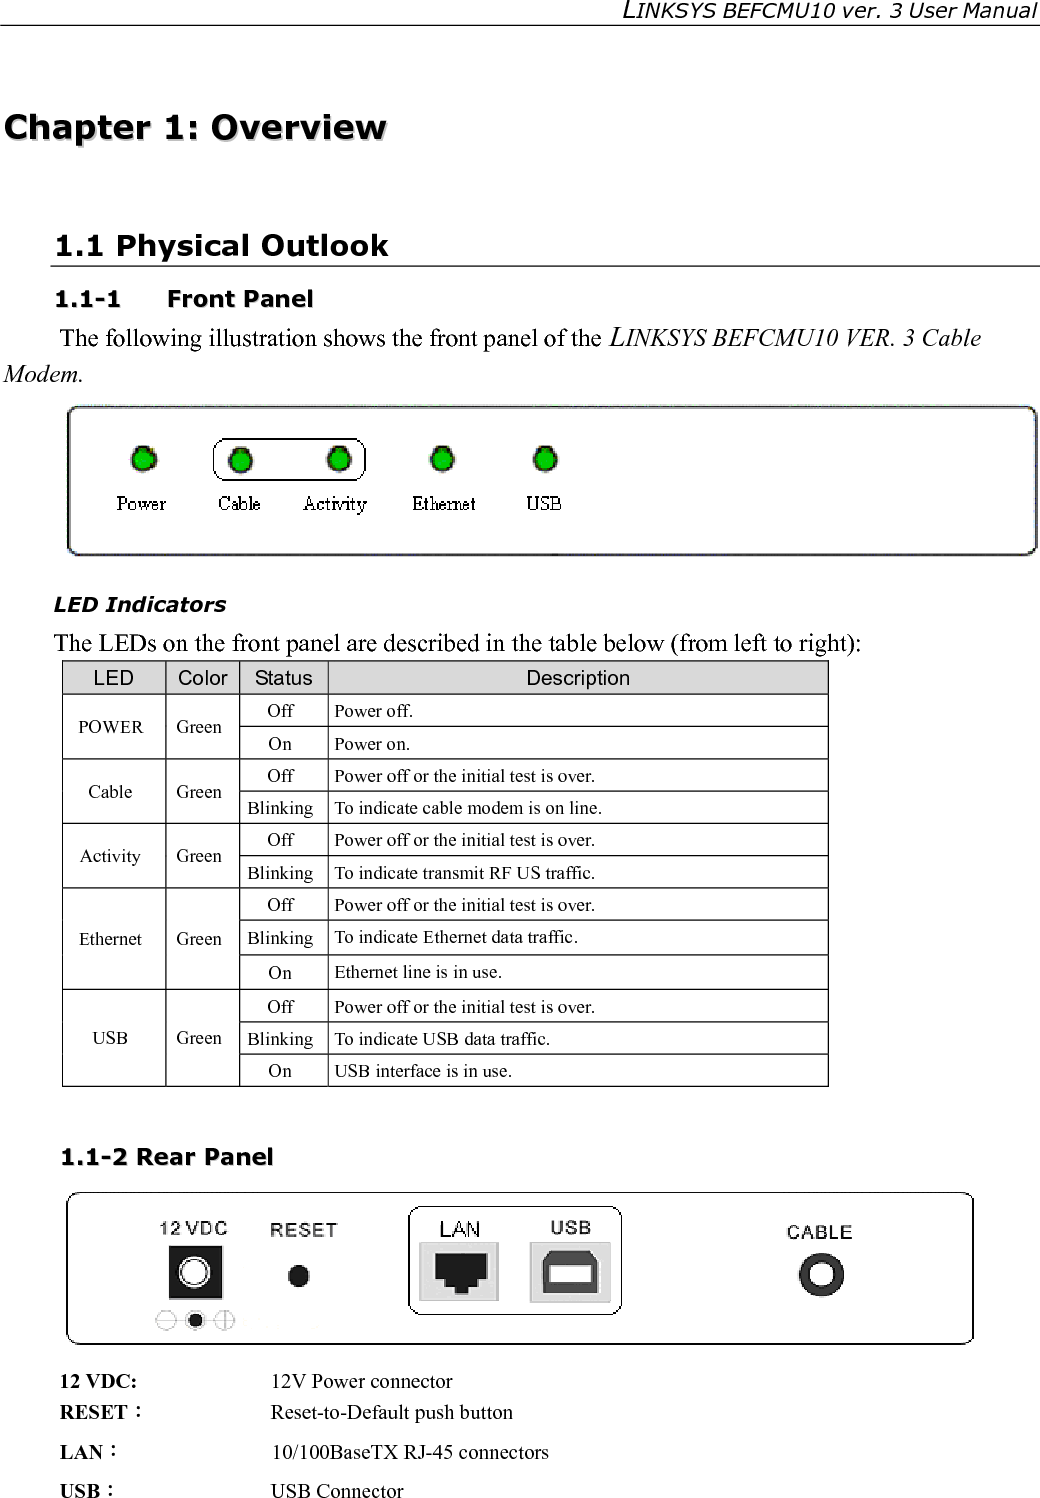 LINKSYS BEFCMU10 ver. 3 User Manual   CABLE︰ F-Connector 